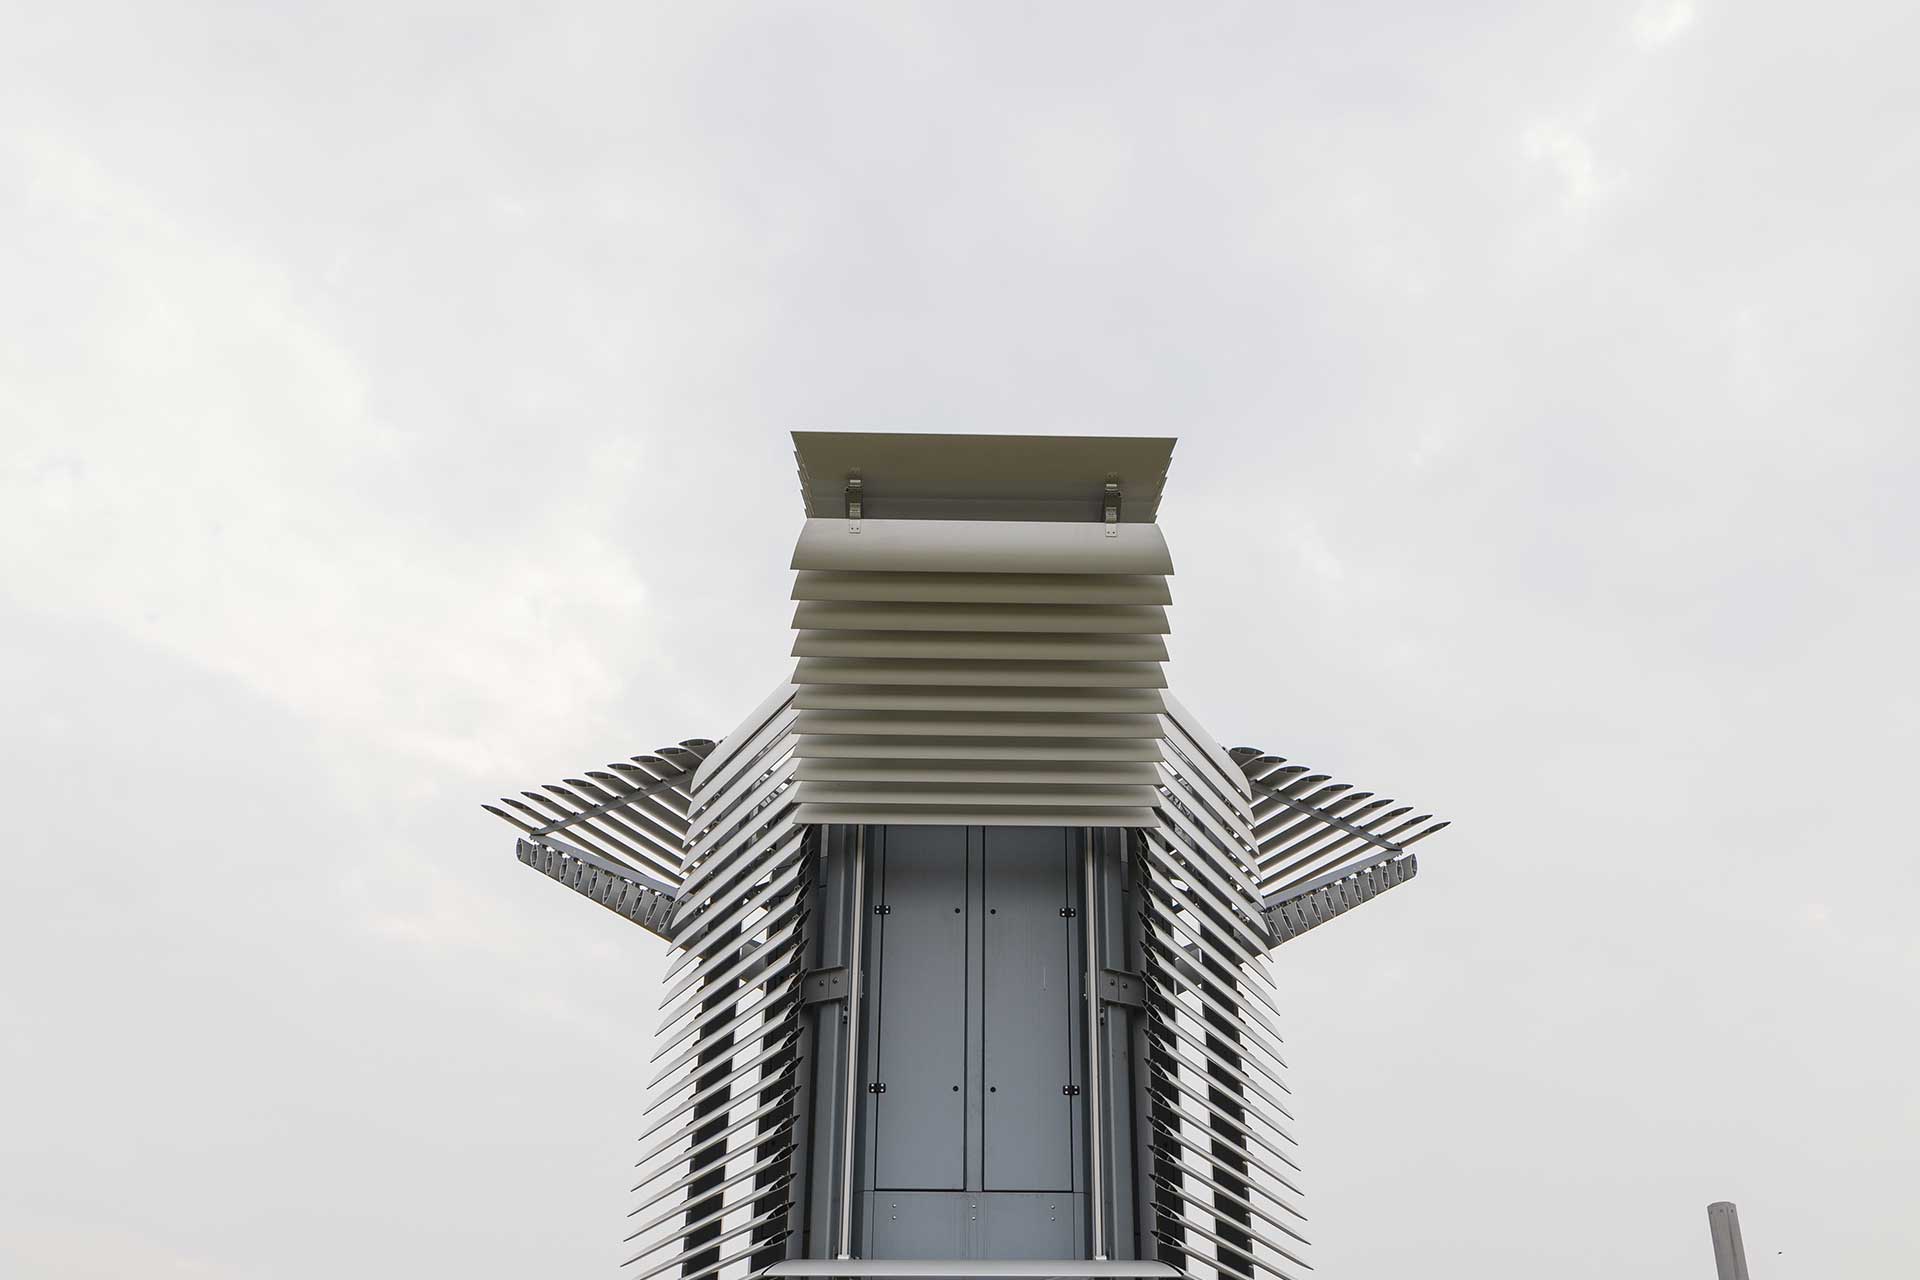 The Smog free tower, a project by Daan Roosegaarde in Los Angeles, the Smog City